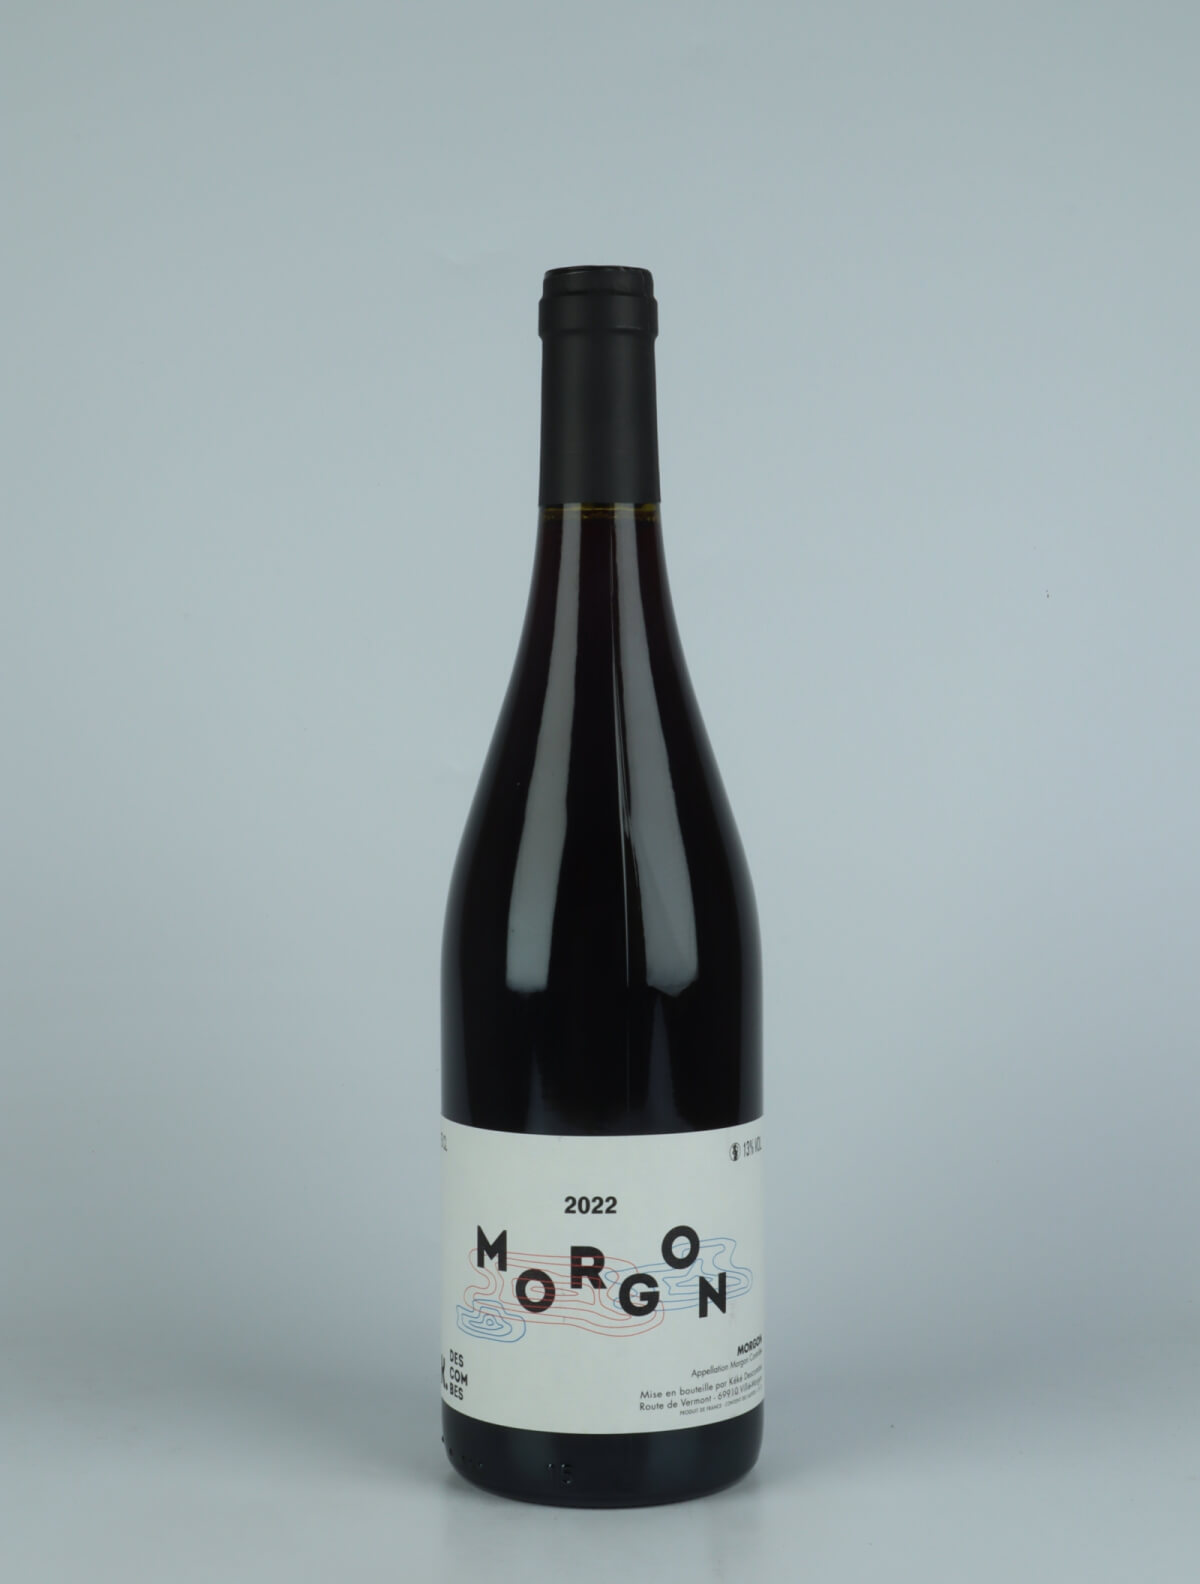 A bottle 2022 Morgon Red wine from Kewin Descombes, Beaujolais in France